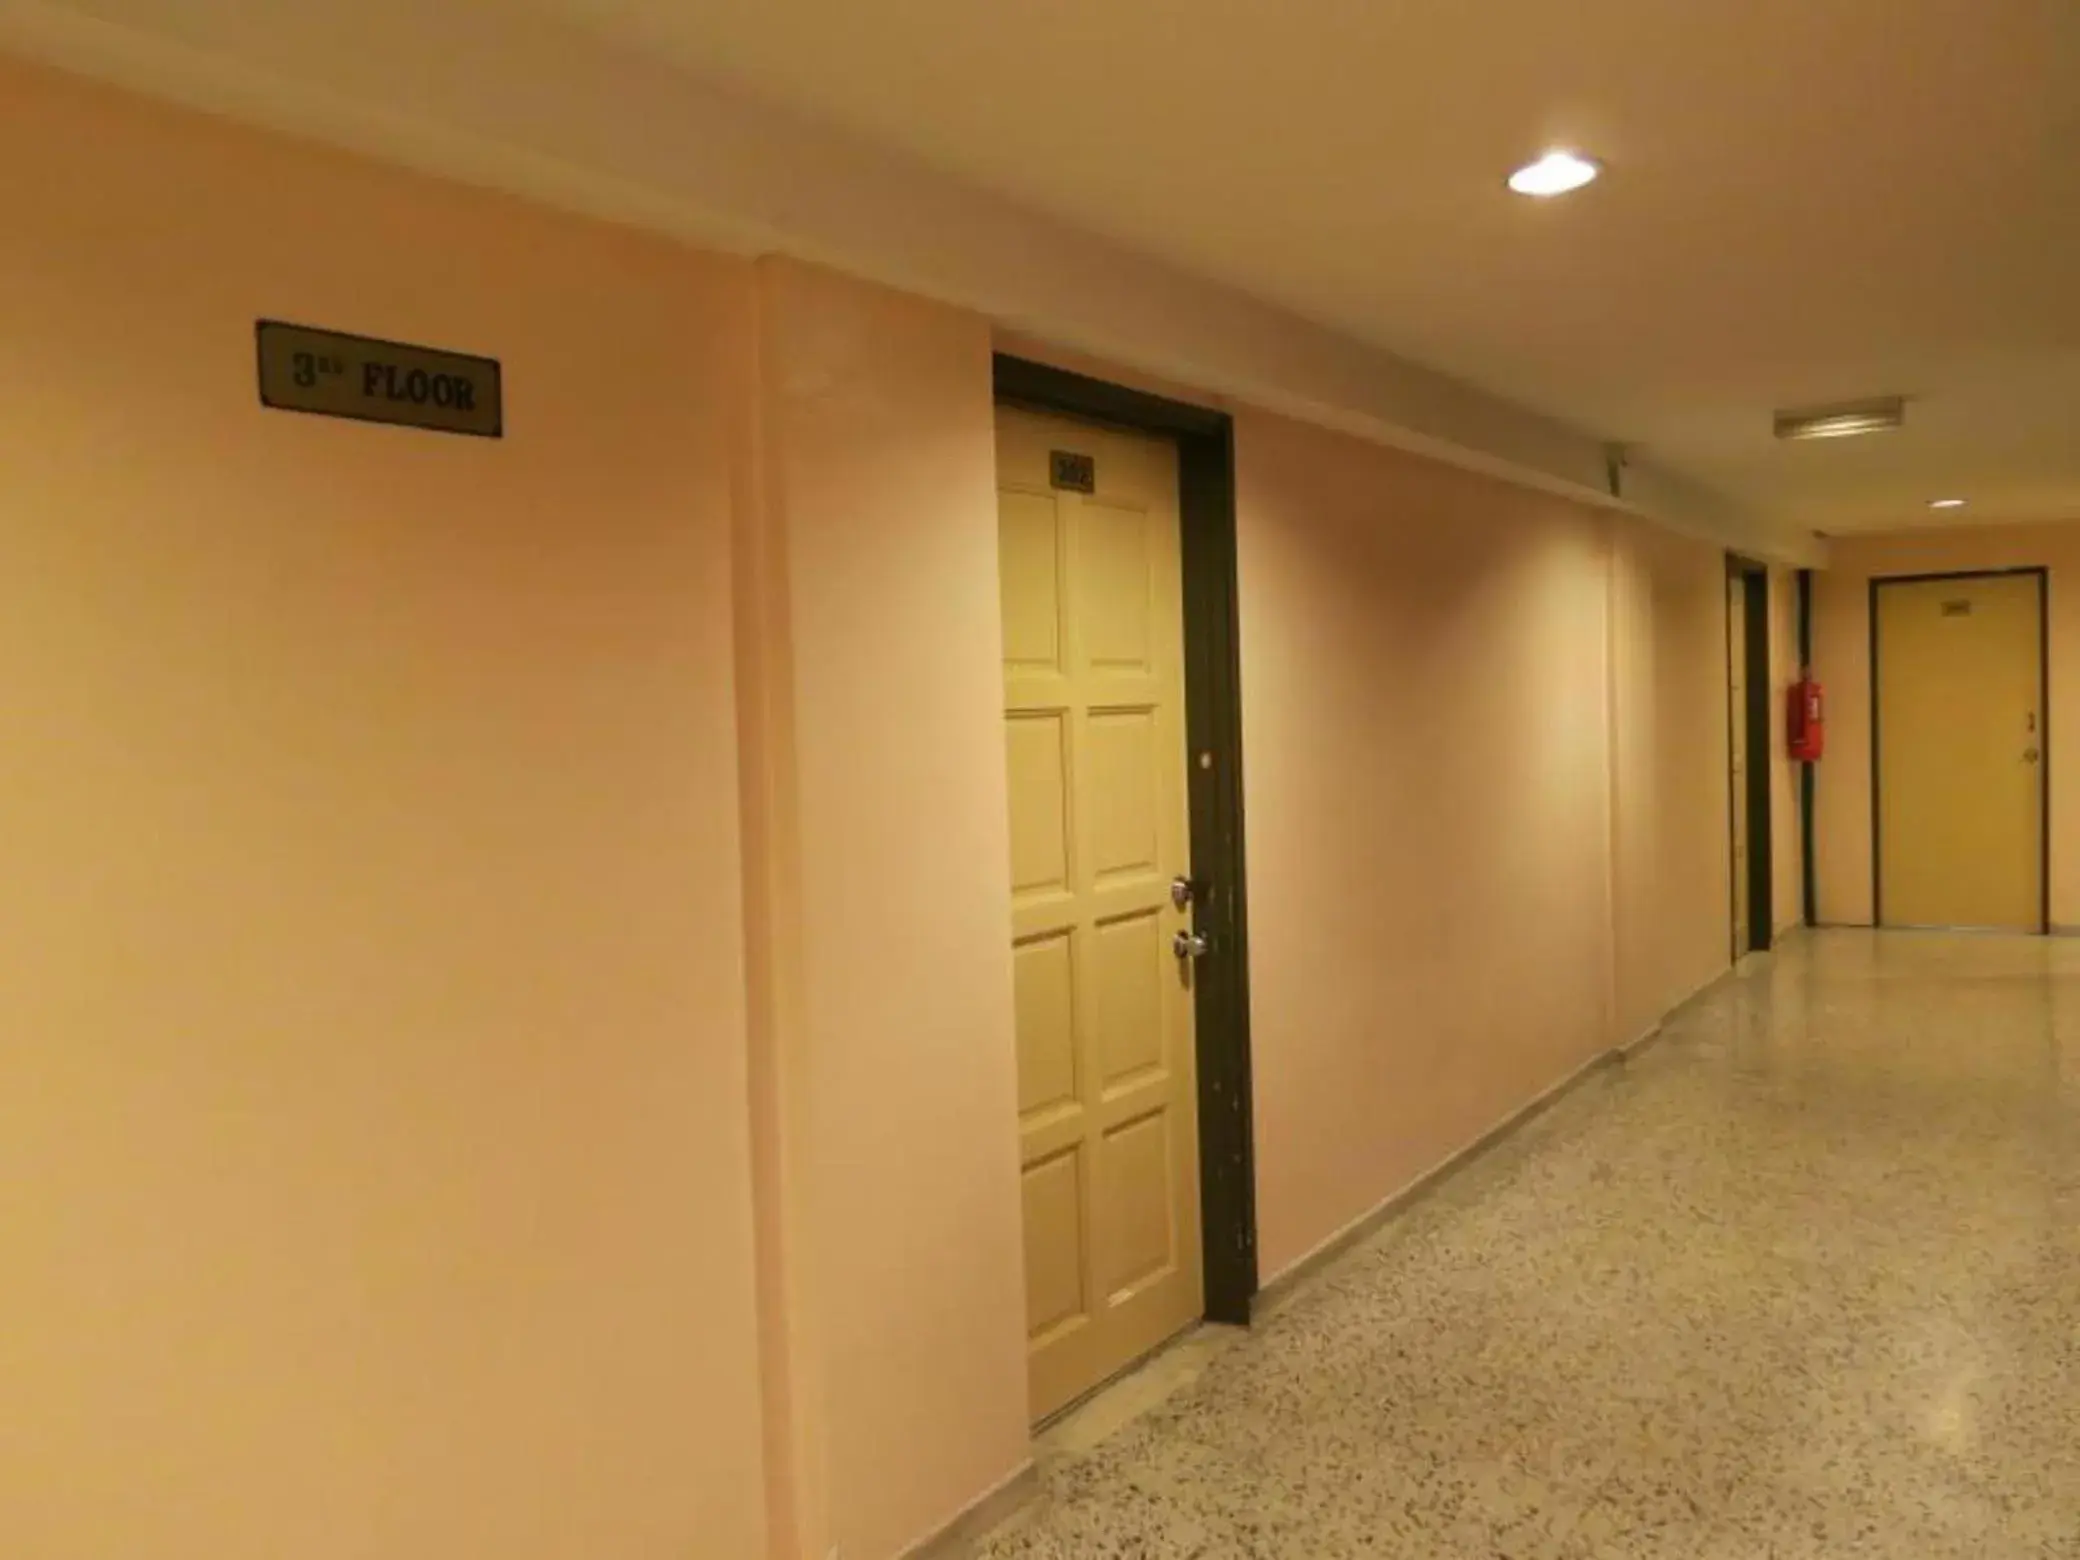 Area and facilities in Nan Yeang Hotel